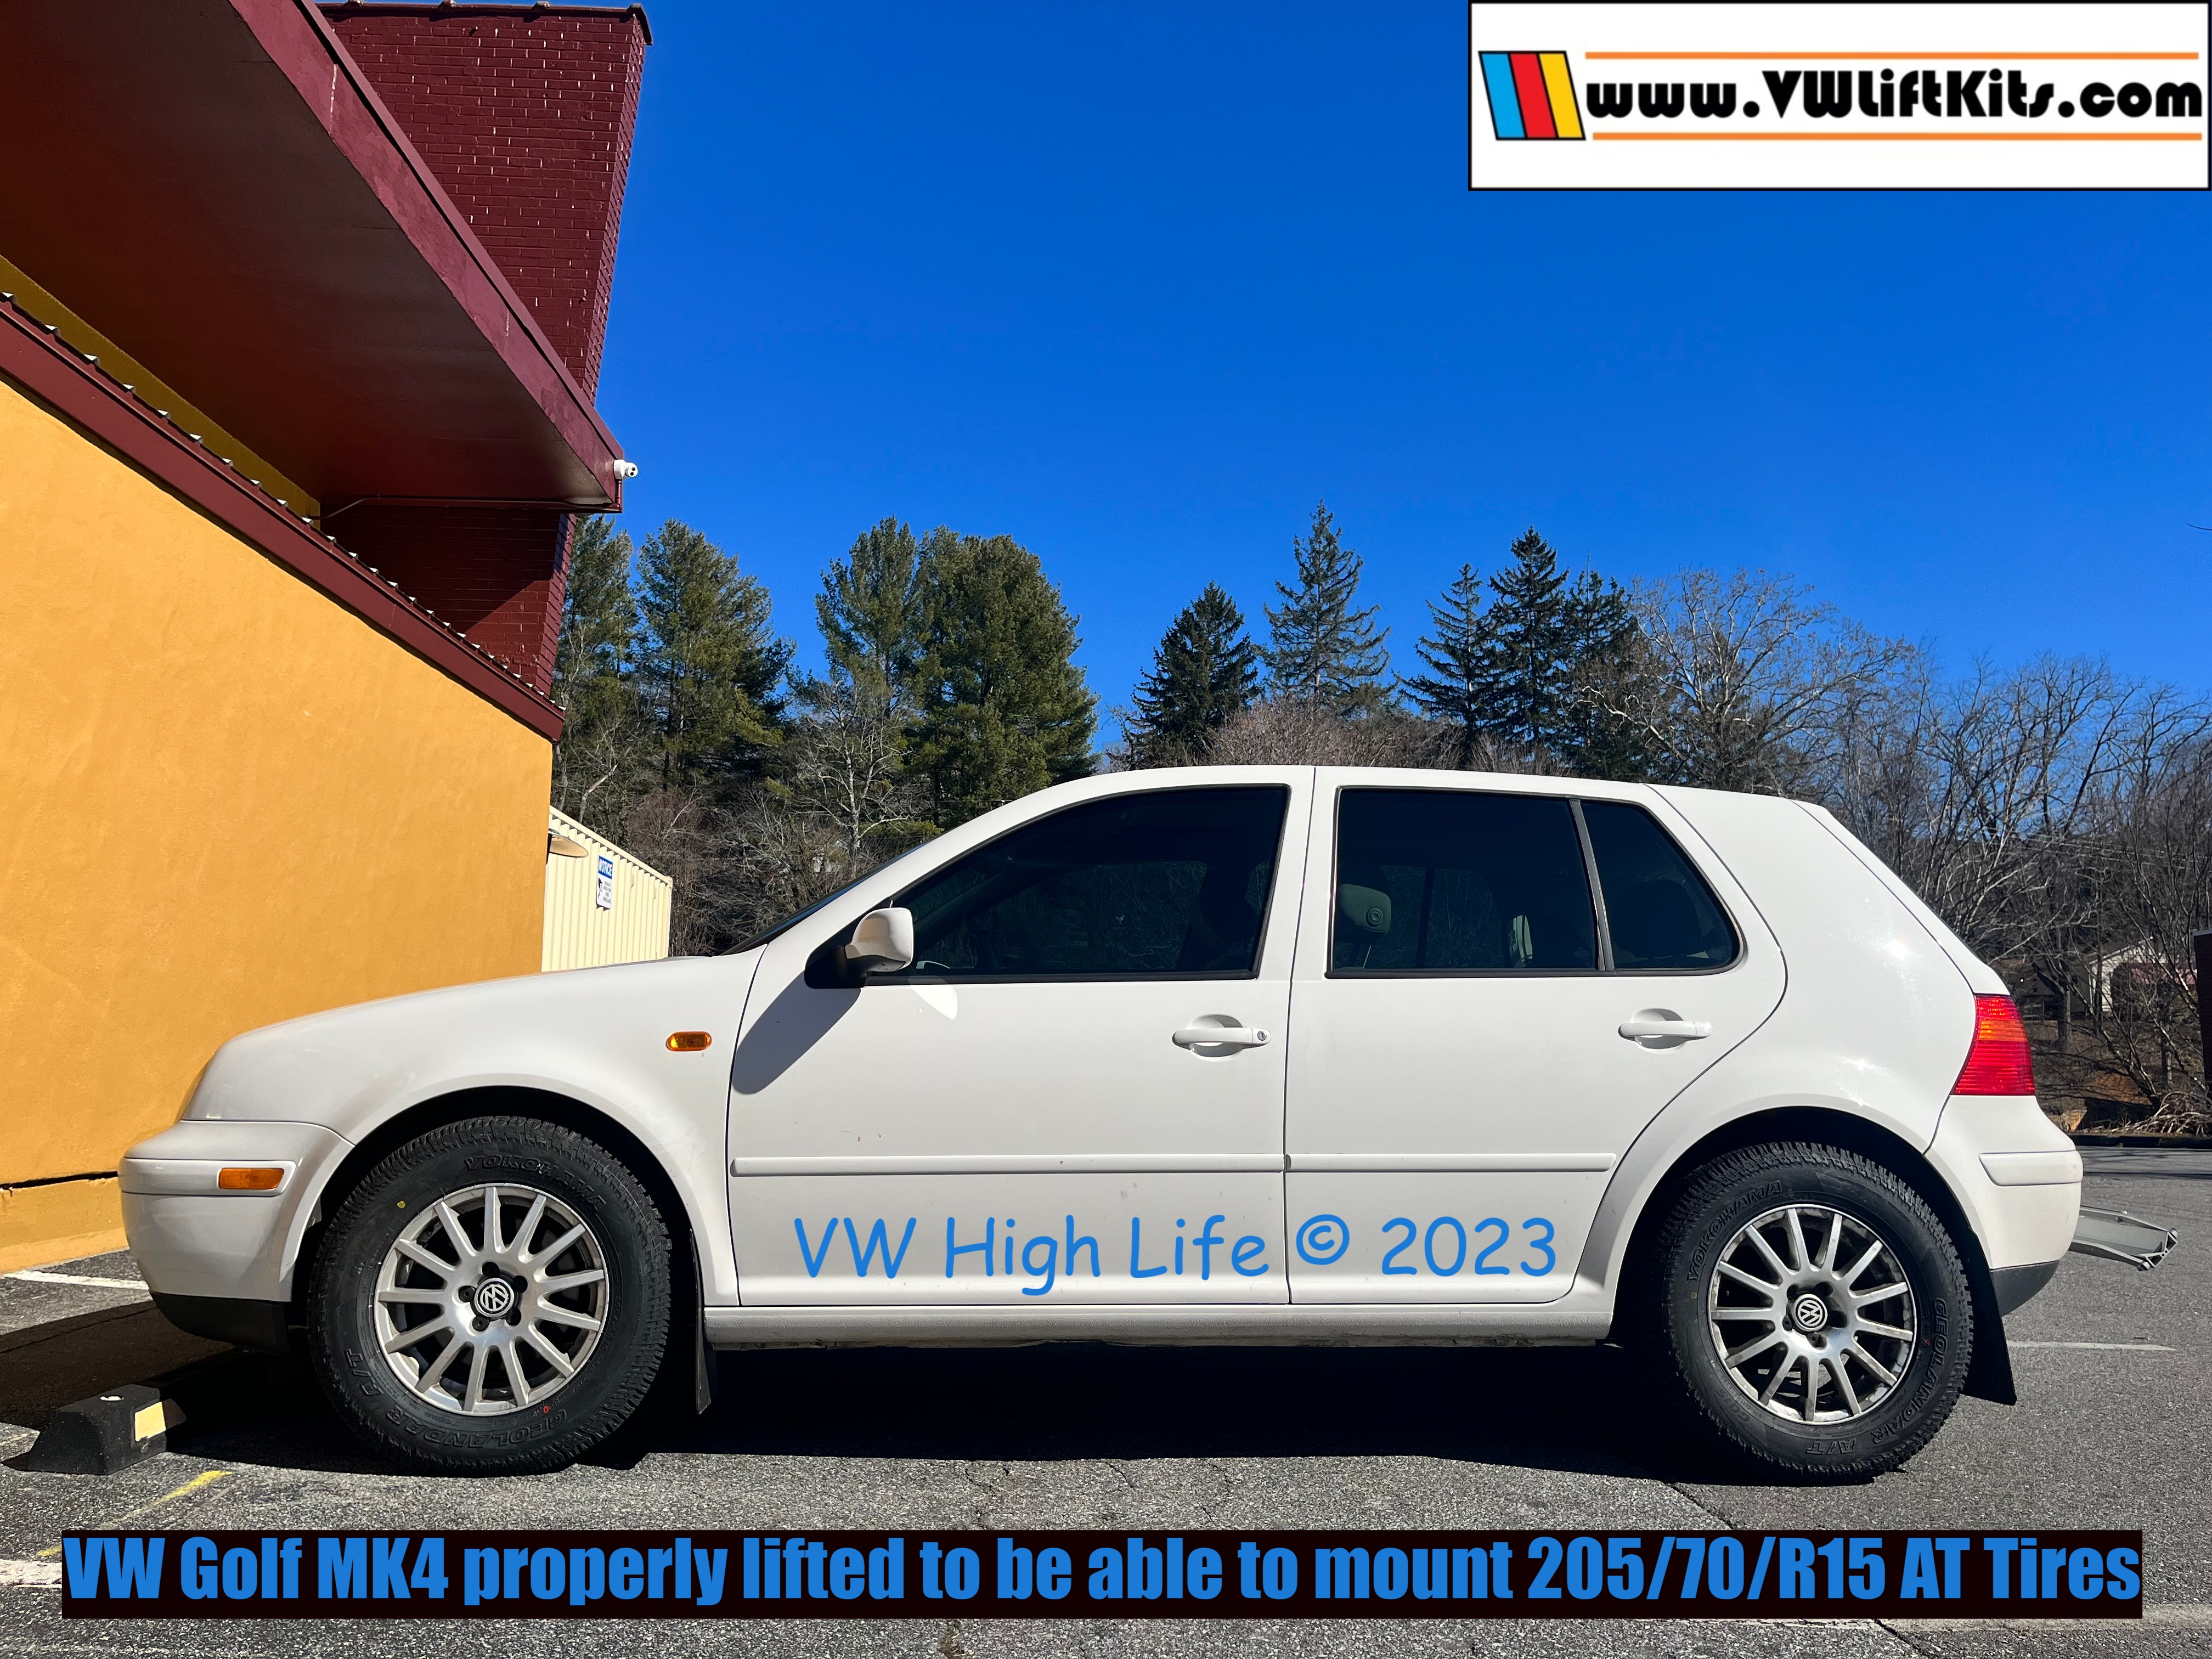 John properly lifted his MK4 Golf to make room for some 27-inch (205/70/R15) all-terrain tires.